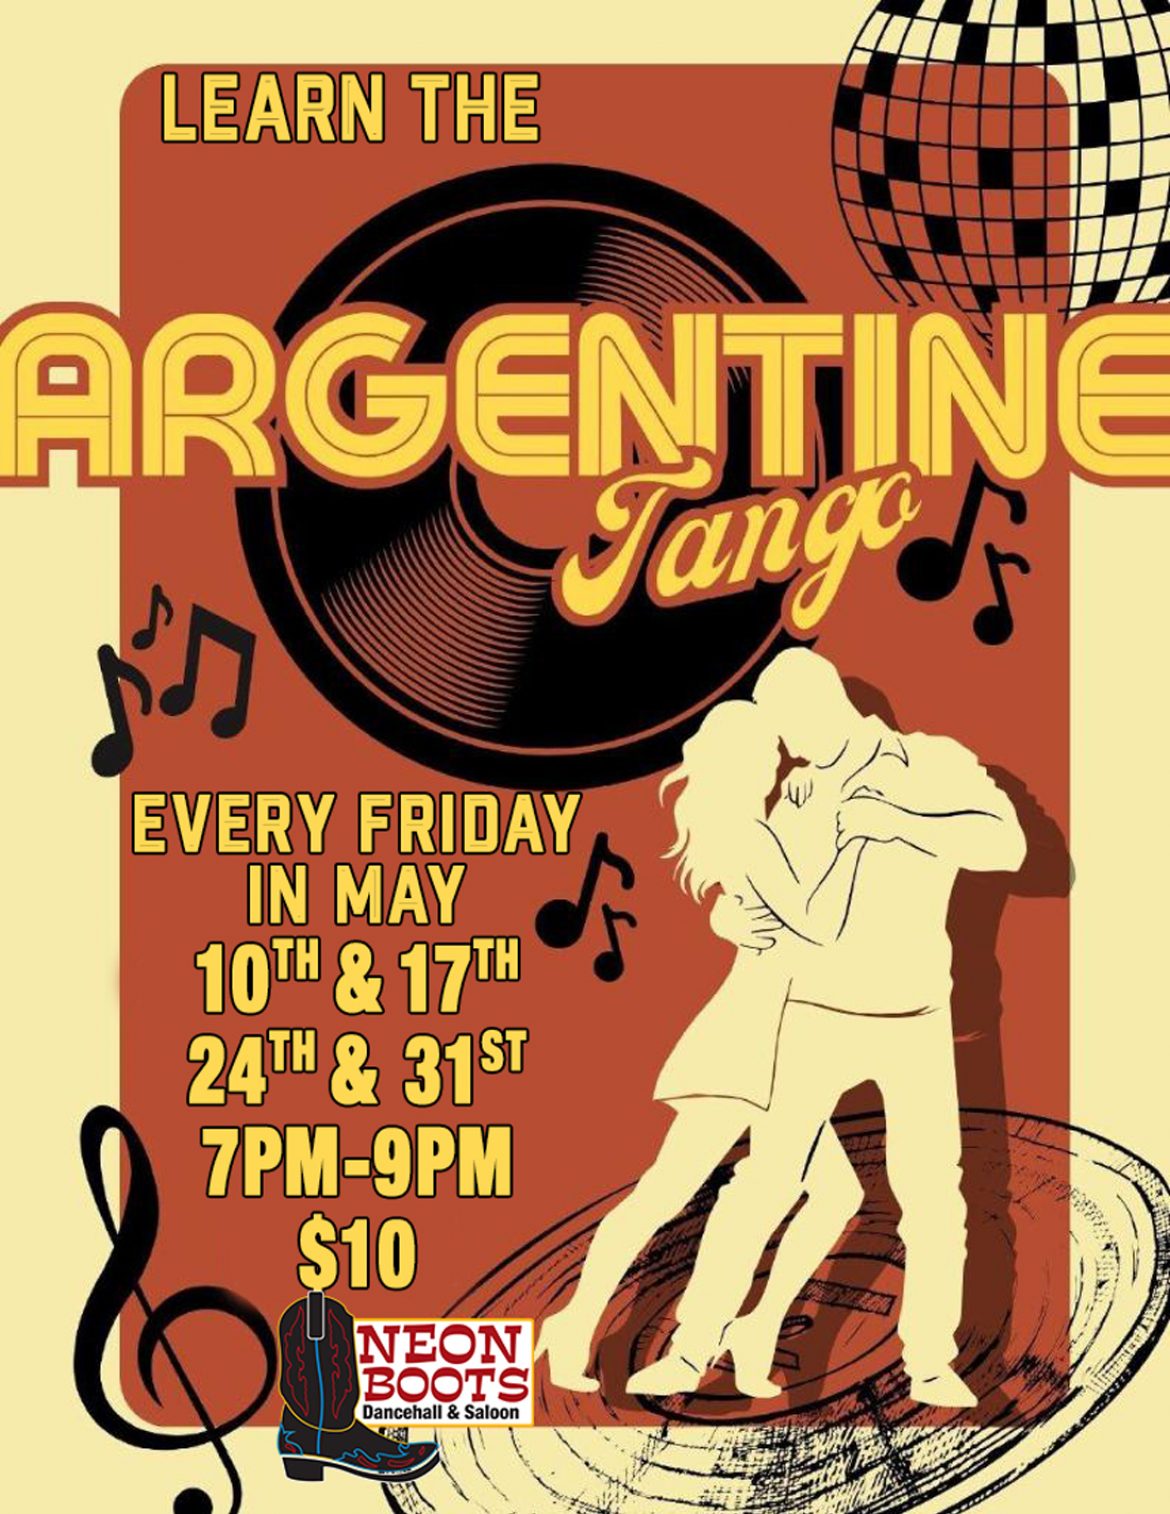 ARGENTINE DANCE LESSONS AT NEON BOOTS EVERY FRIDAY IN MAY